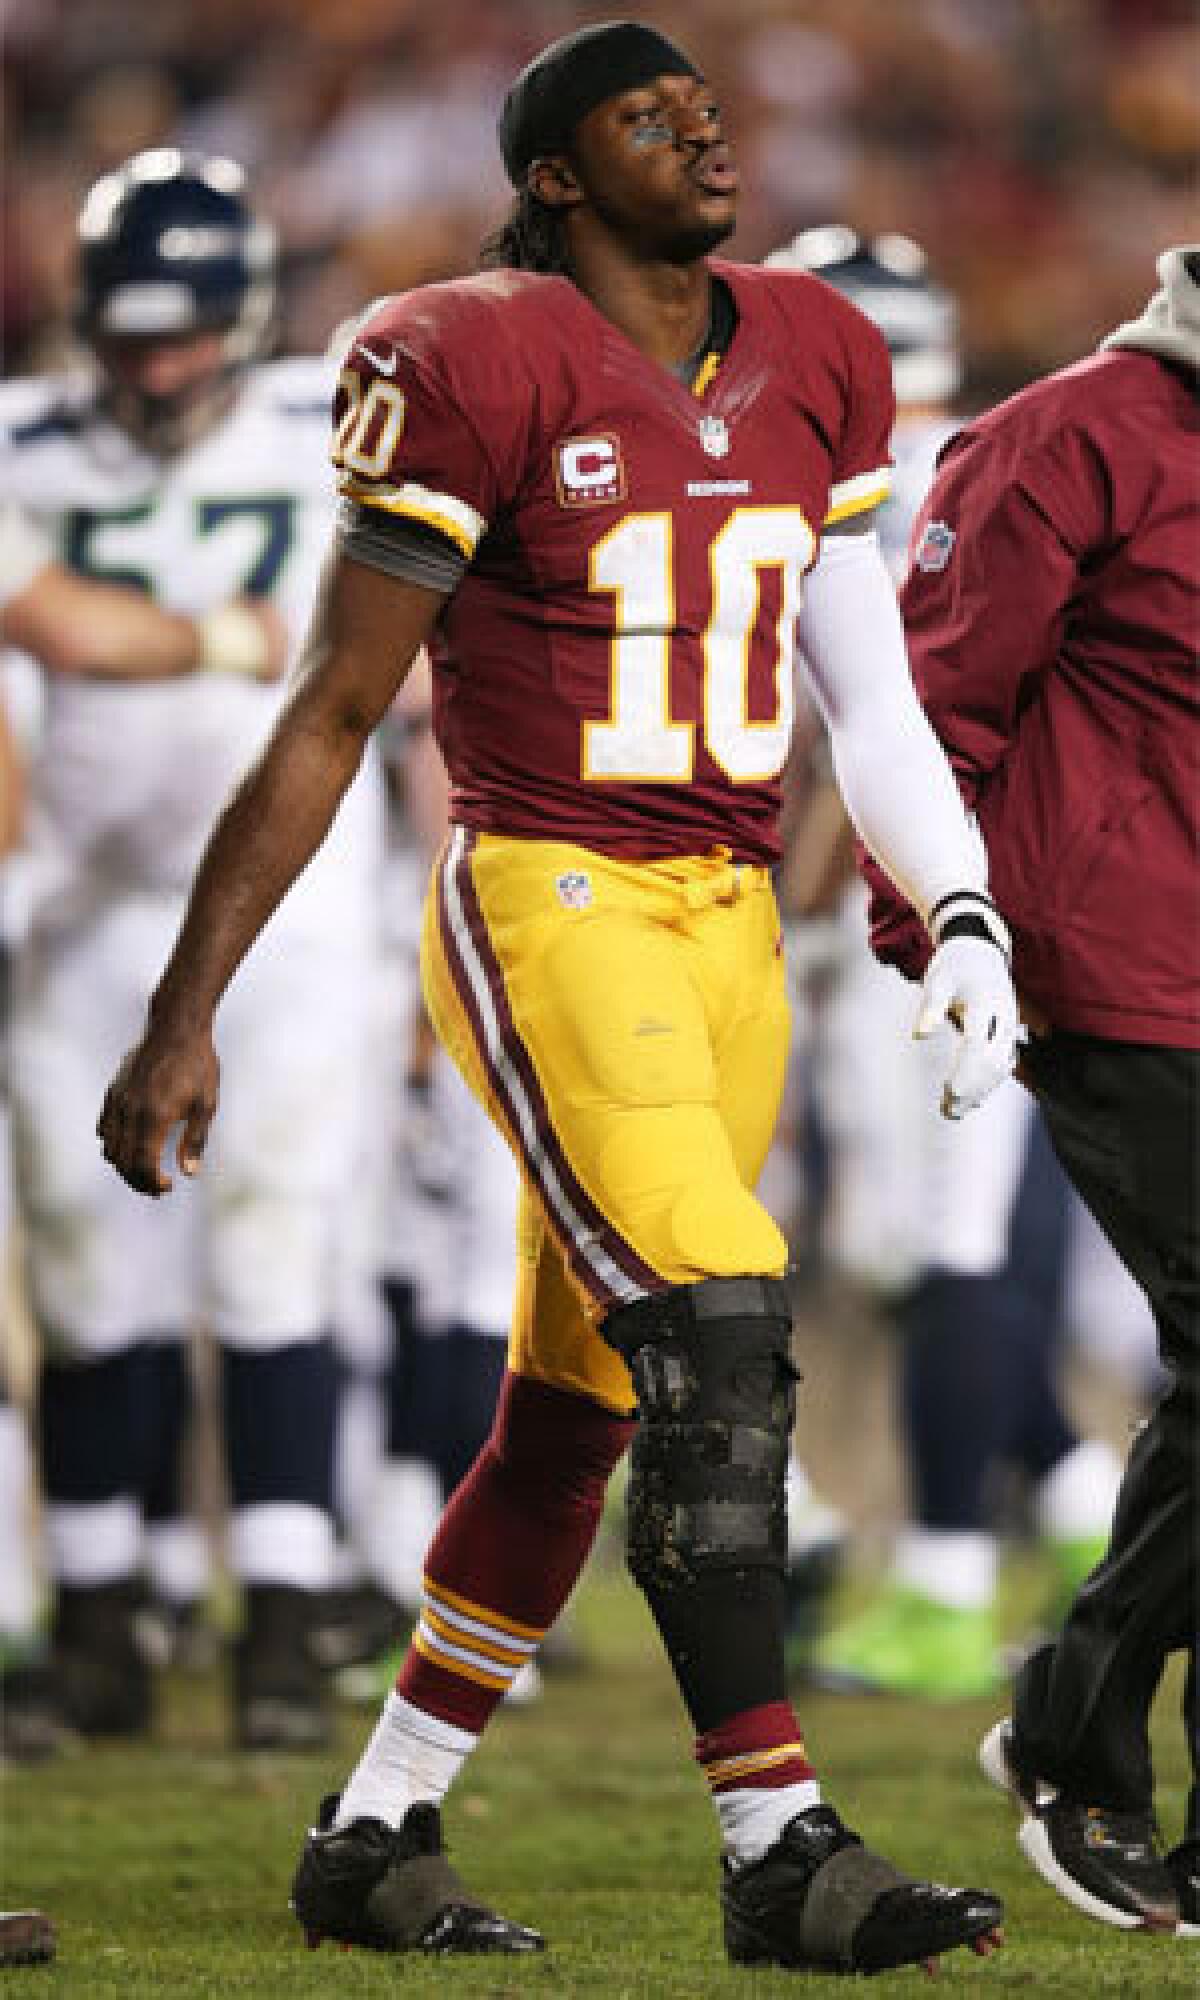 Washington quarterback Robert Griffin III leaves the field injured during the Redskins' 24-14 loss to Seattle on Sunday.